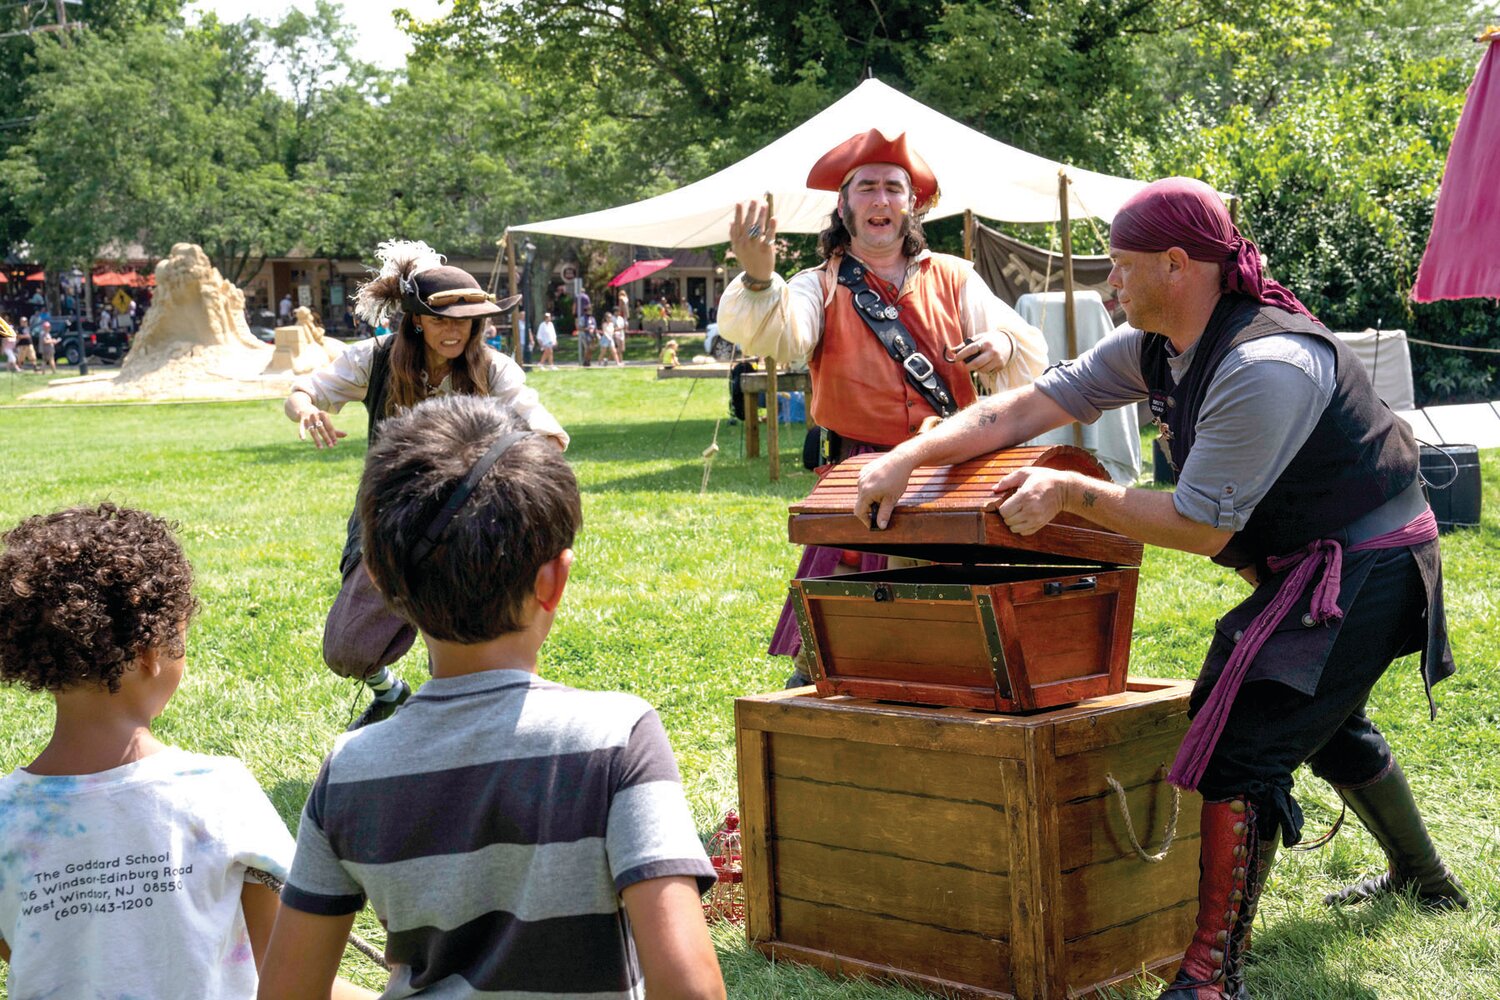 Members of Pirates of Fortune’s Folly, an entertainment group, lead fellow crewmates along for a treasure hunt at the Peddler's Village Peach Festival Aug. 6.